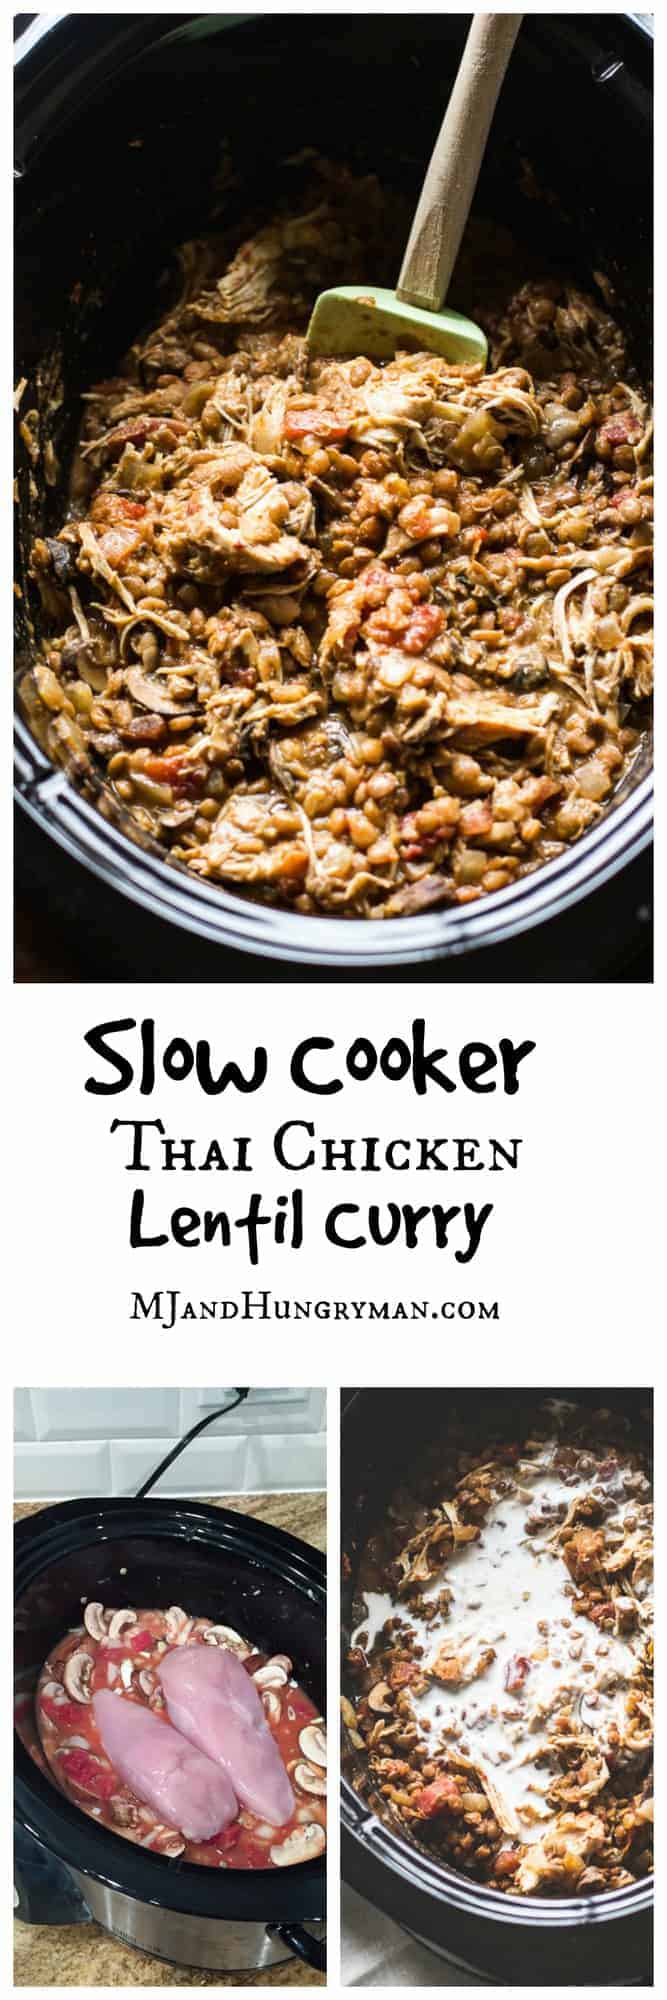 Slow cooker thai chicken lentil curry